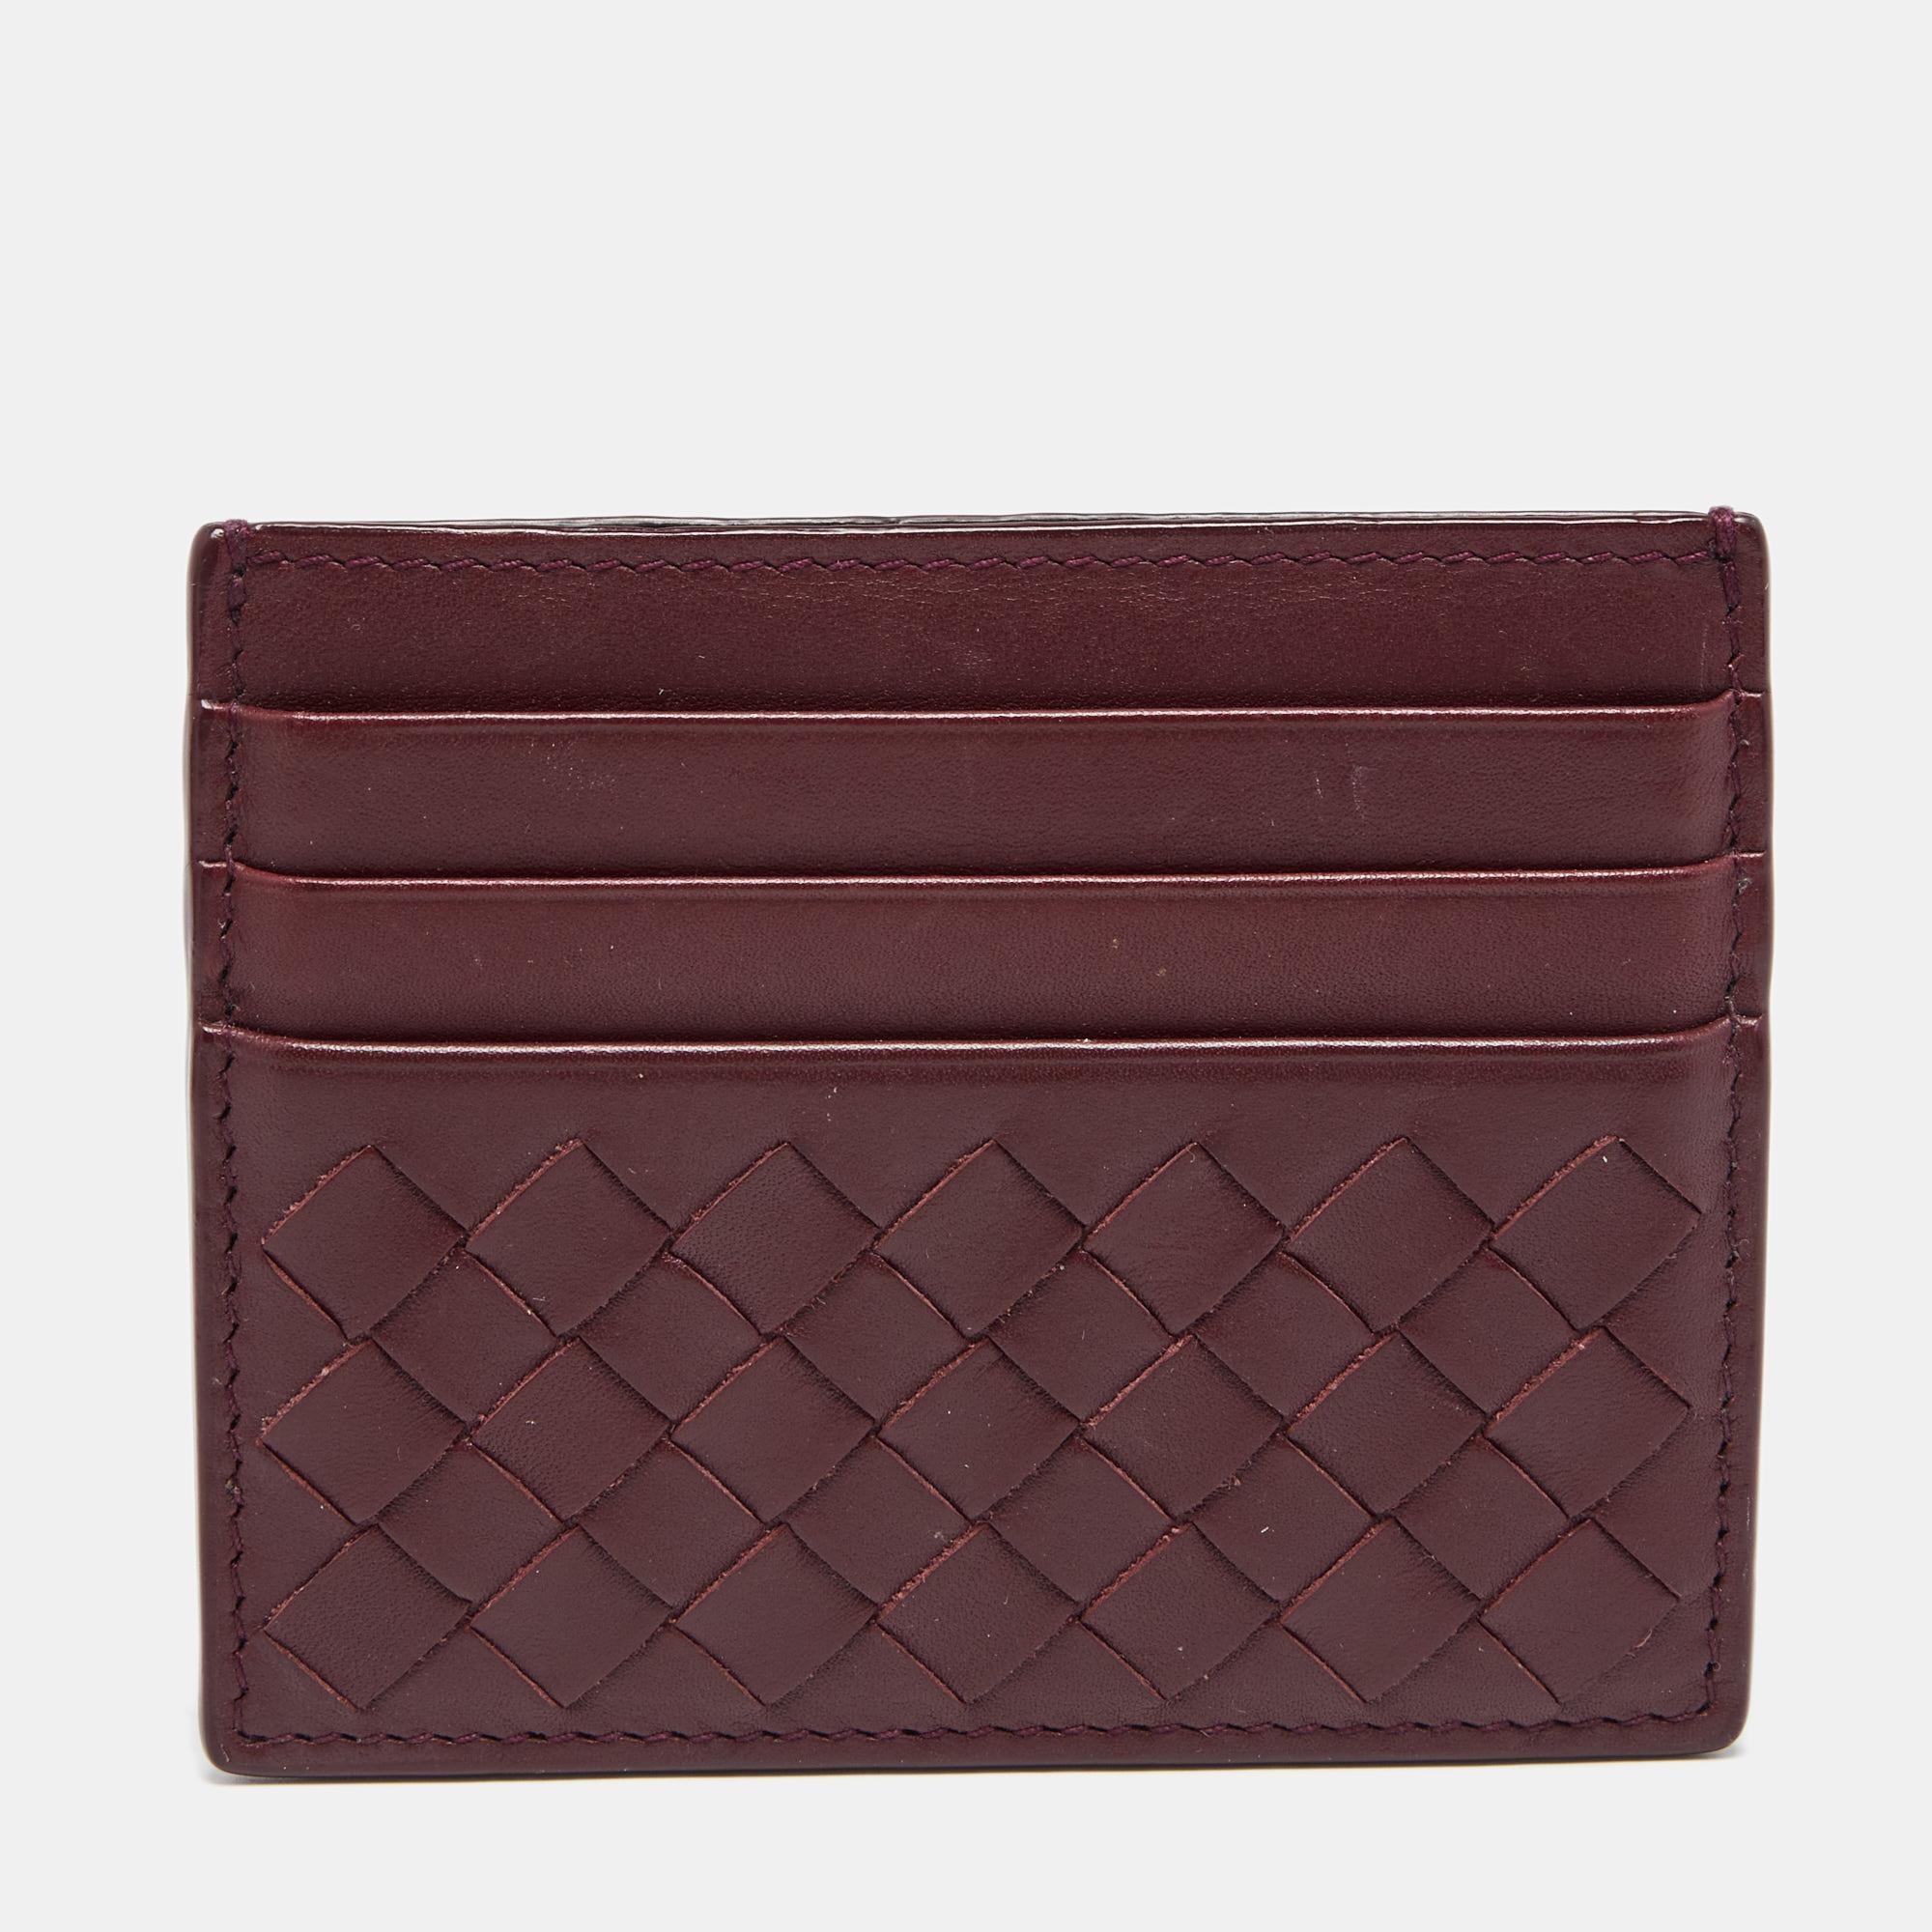 Crafted out of quality leather in their signature Intrecciato pattern, this card Holder by Bottega Veneta comes equipped with multiple slots that will dutifully hold your cards and an open compartment. This piece is sleek and can easily slip into